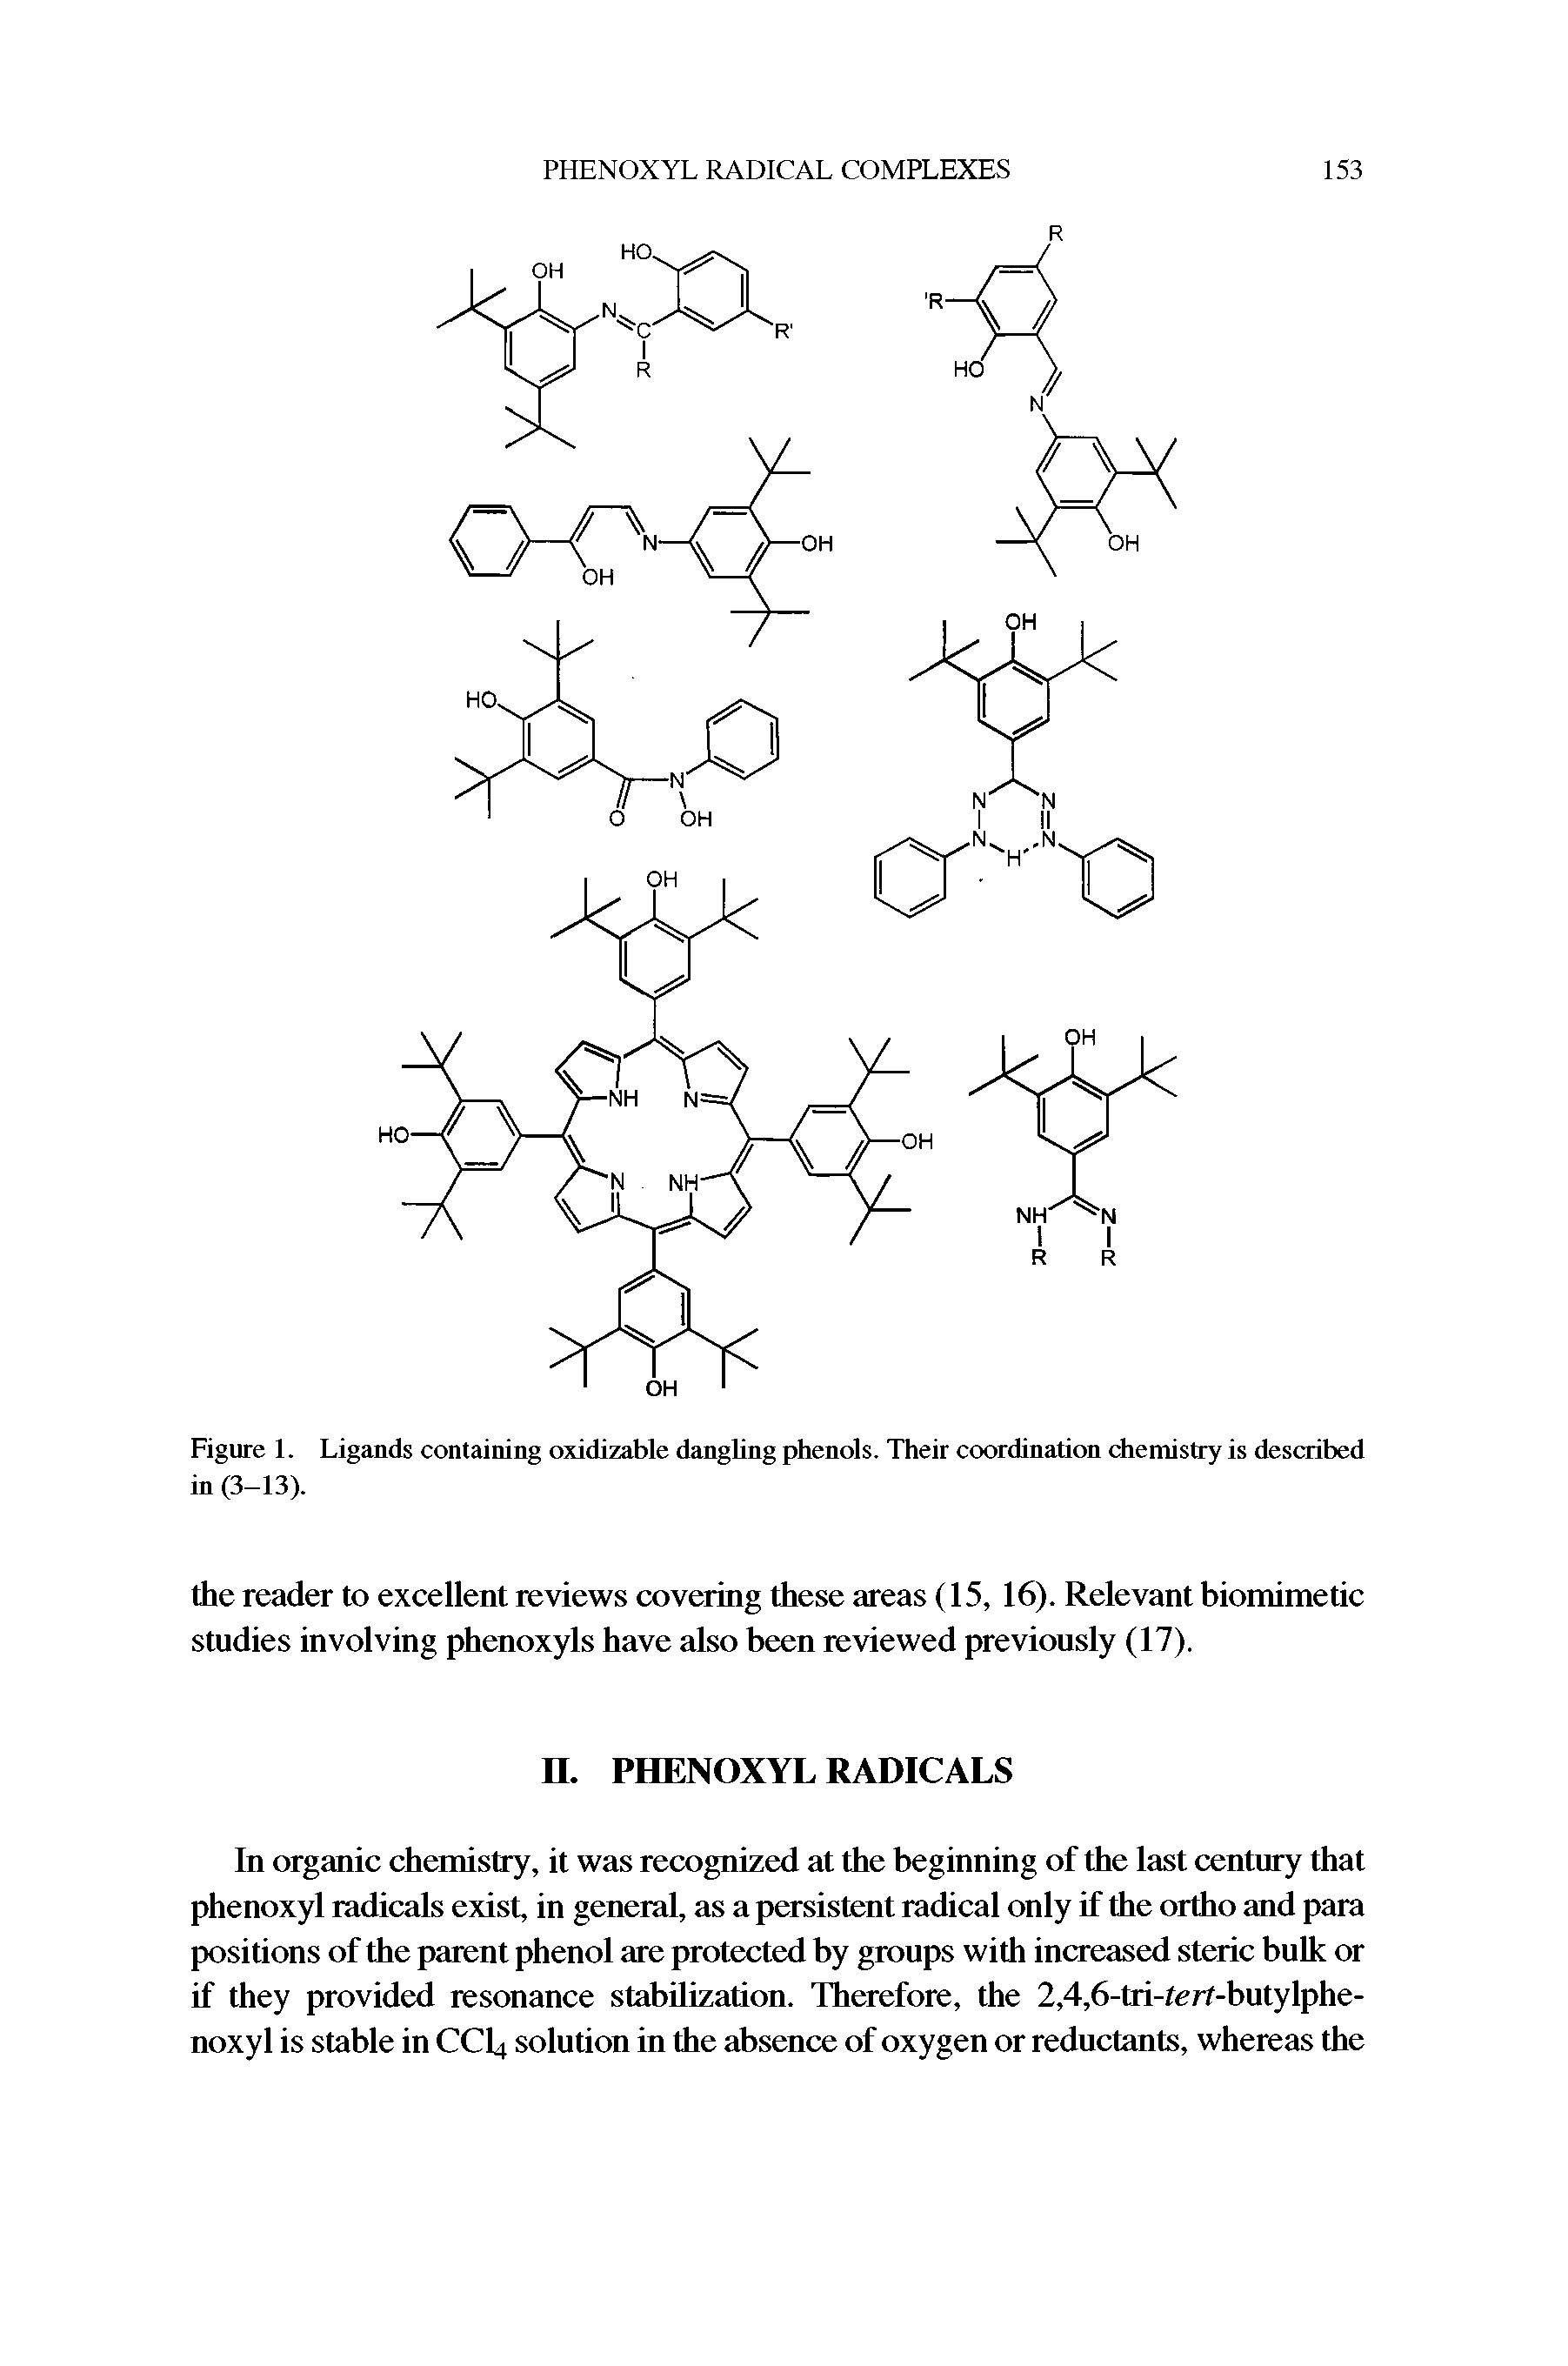 Figure 1. Ligands containing oxidizable dangling phenols. Their coordination chemistry is described in (3-13).